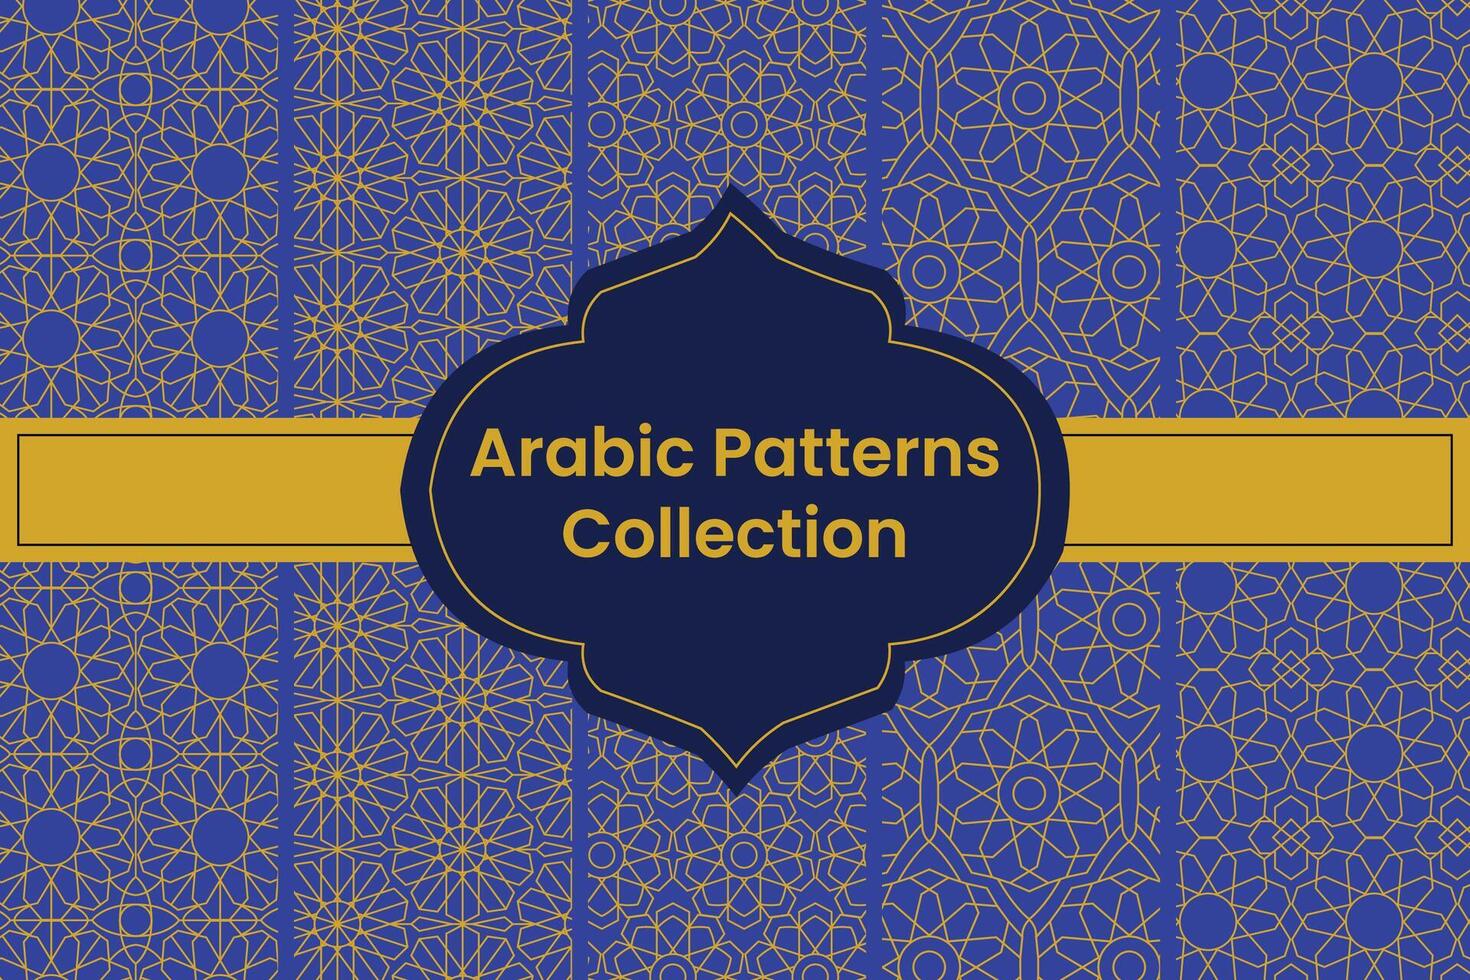 Collection of Golden Arabic Patterns on Purple Background, Vector